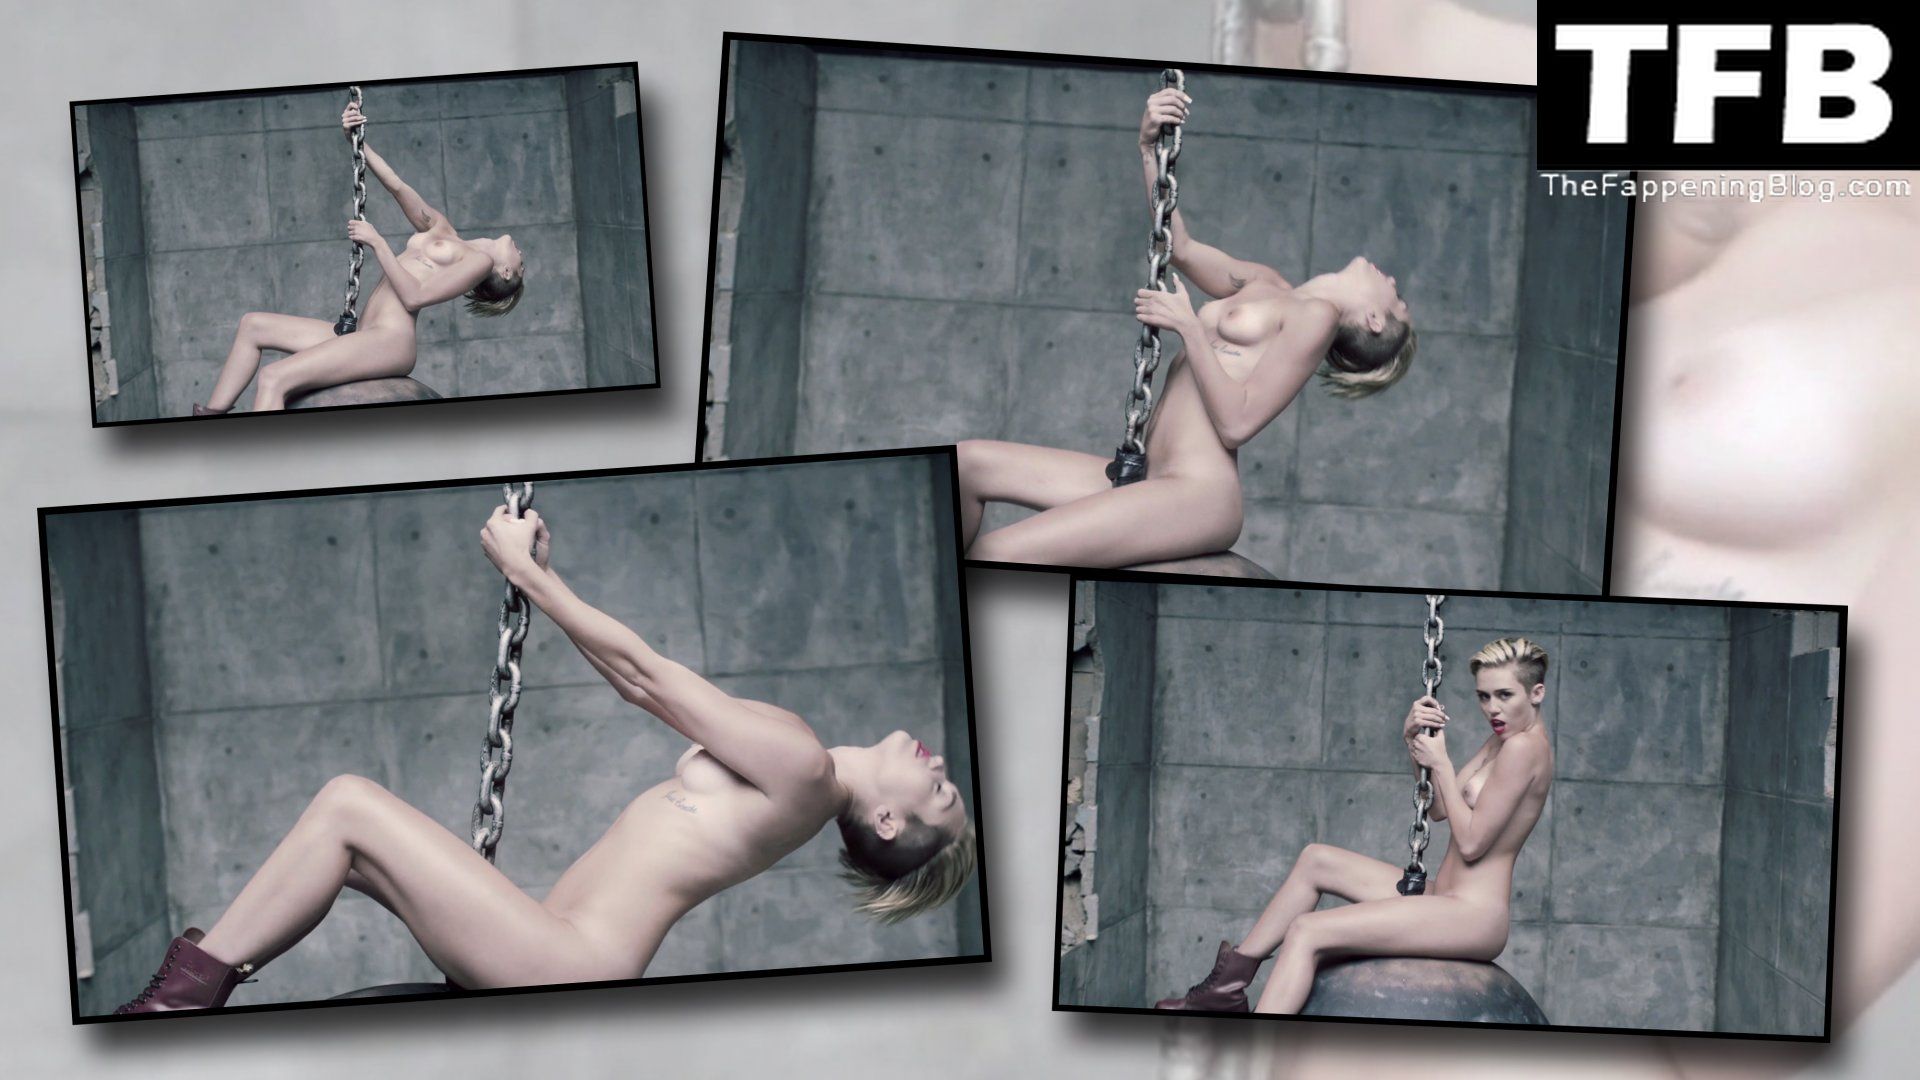 Miley-Cyrus-Nude-Wrecking-Ball-The-Fappening-Blog-2.jpg